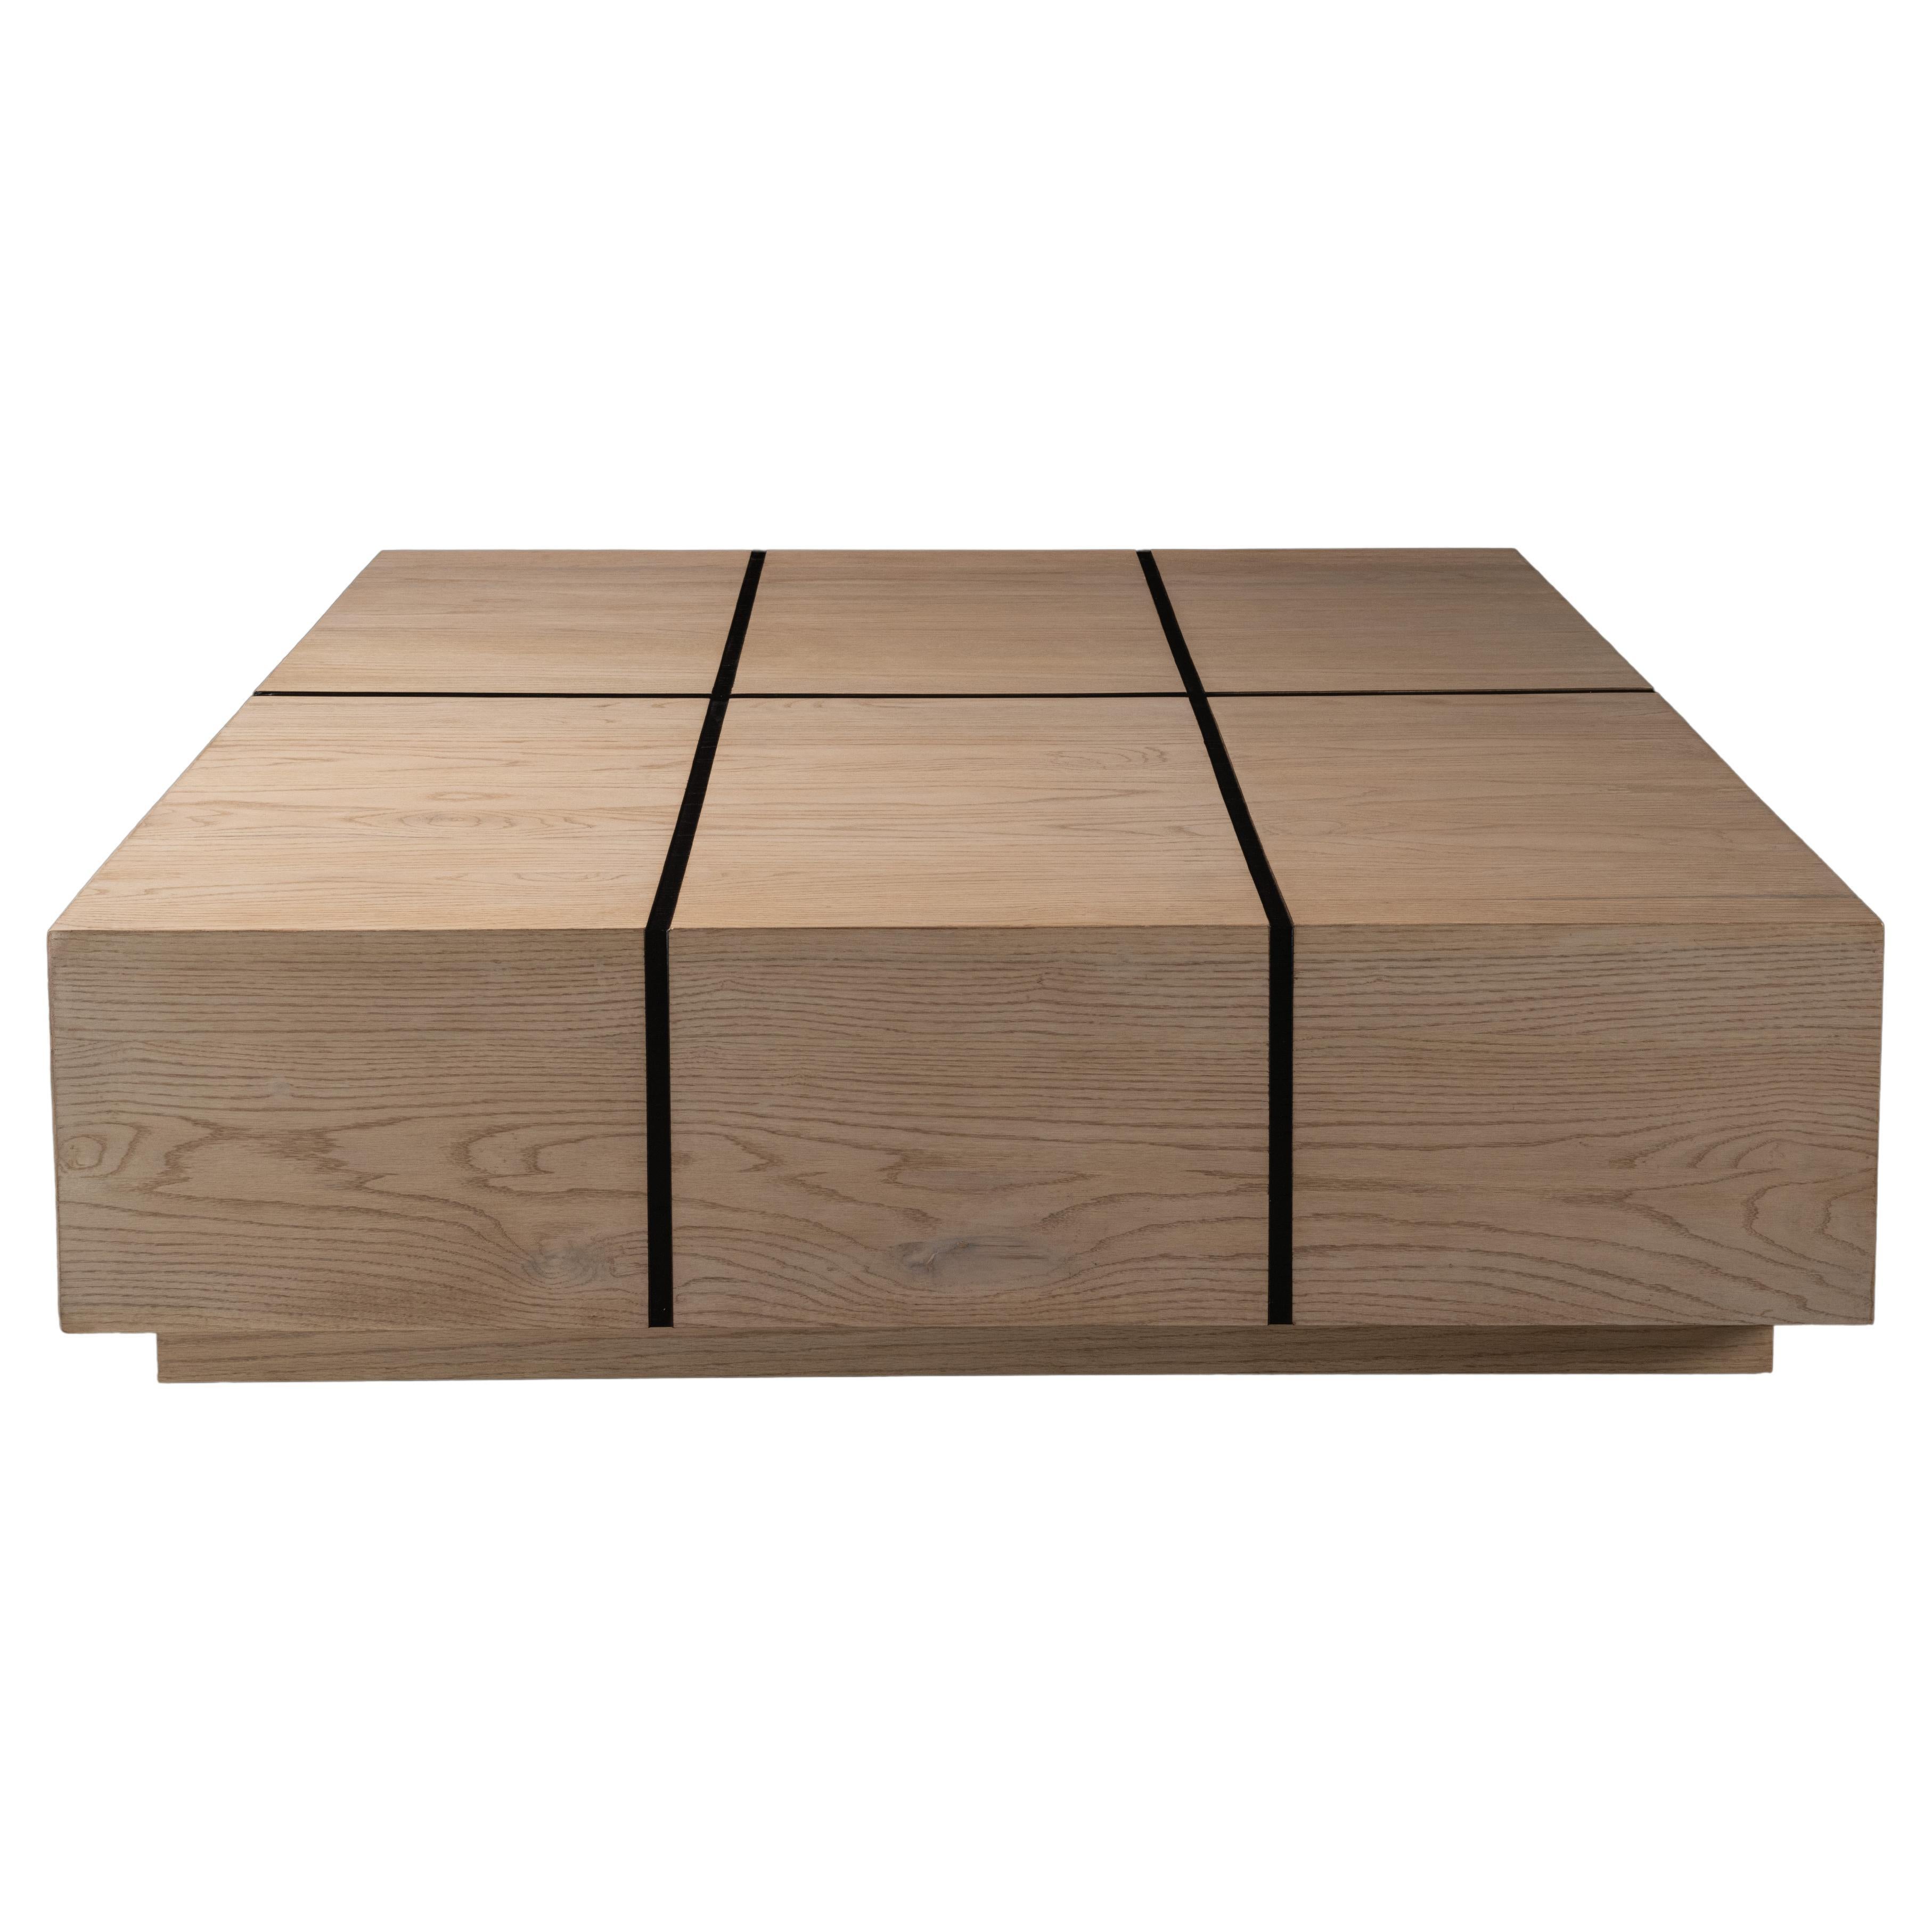 MC Coffee Table For Sale